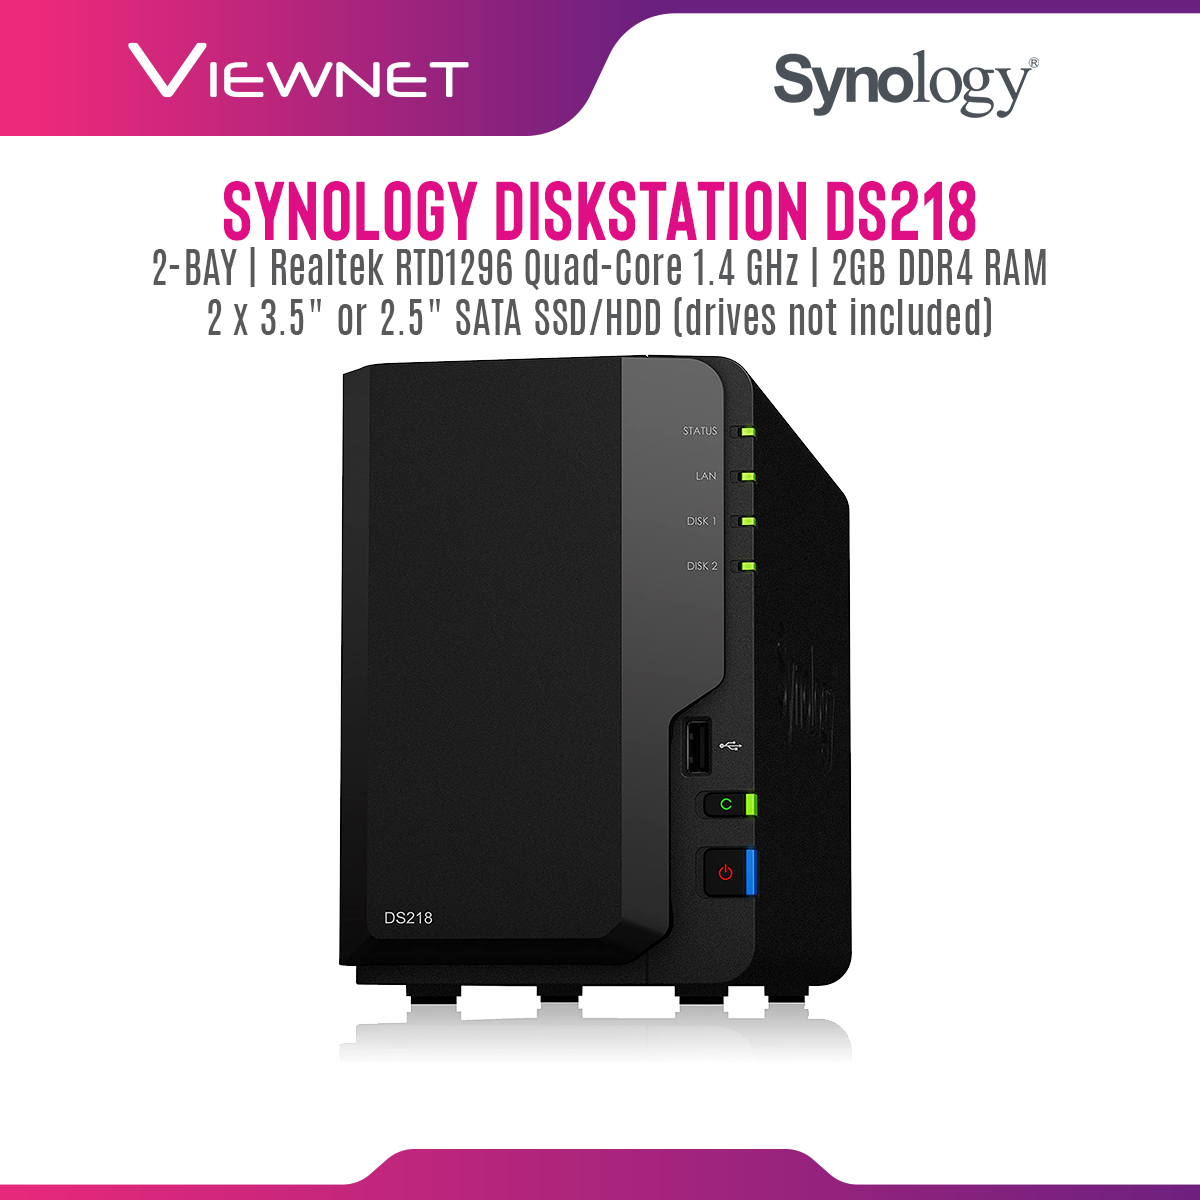 Synology DS218 NAS DiskStation 2-Bay NAS Quad-Core Processor for Office & Home Users